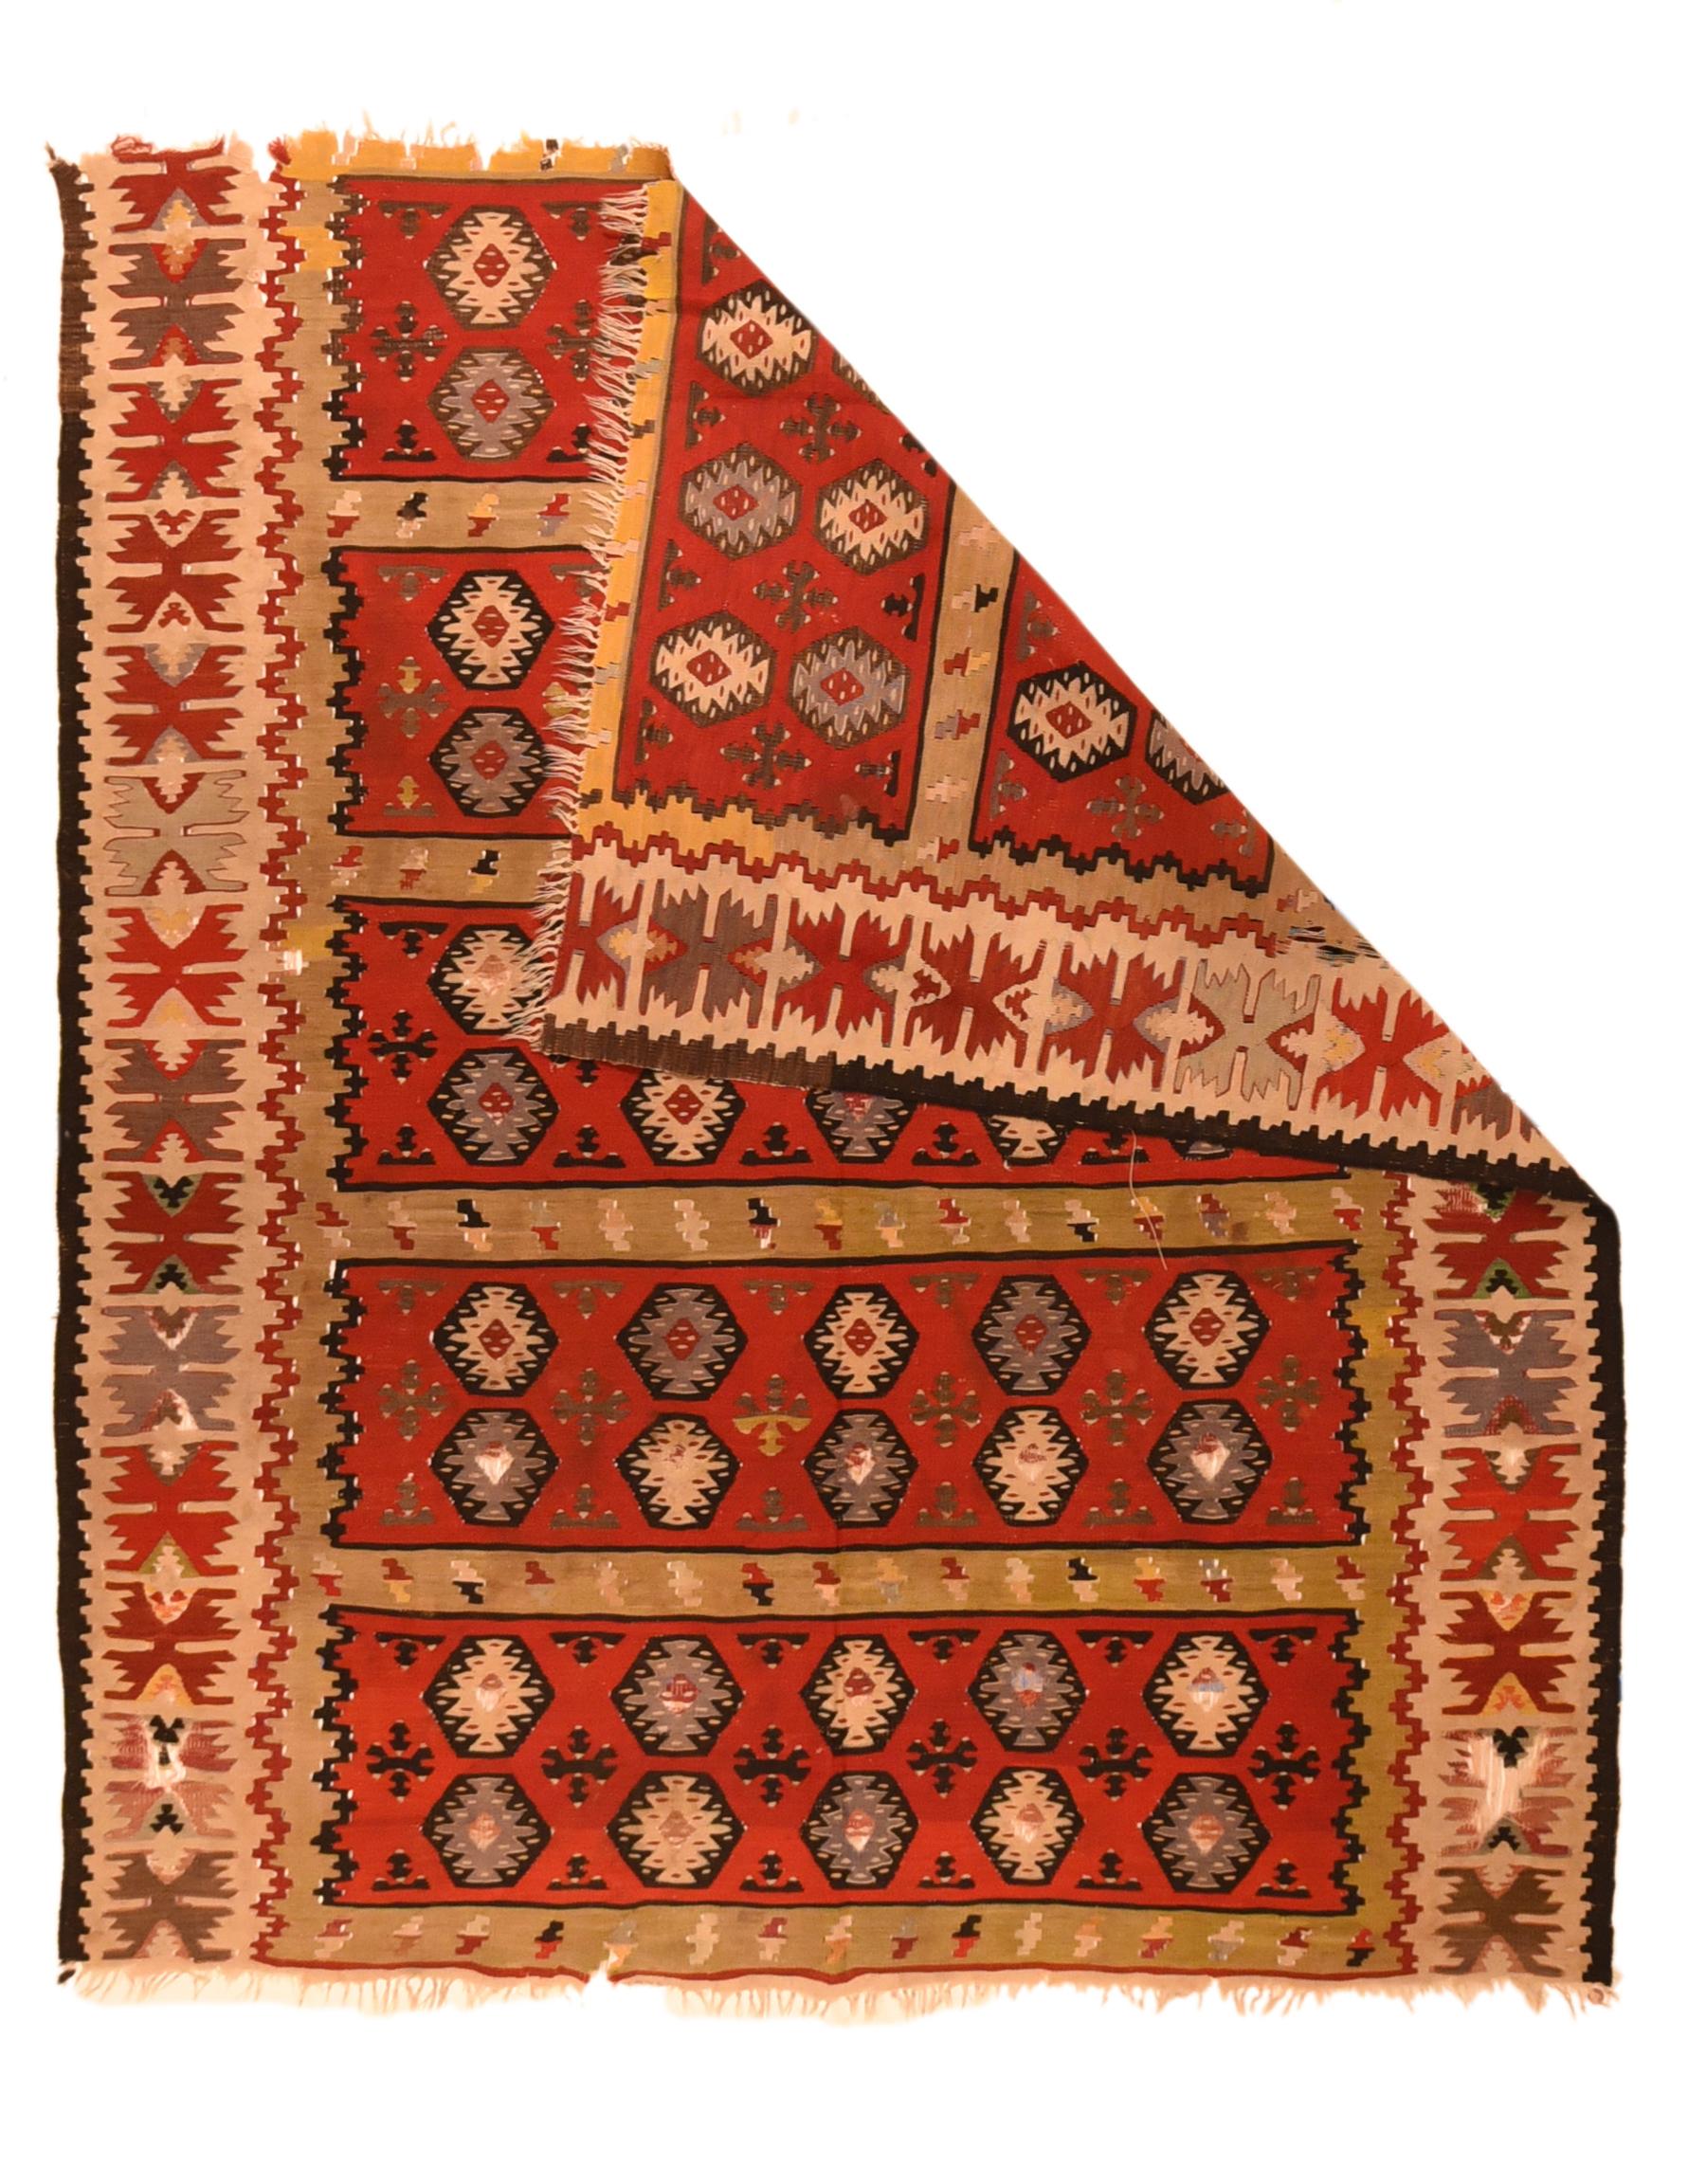 Antique Turkish Kilim rug measures 4'5'' x 5'4''. Now much reduced at each end, this Anatolian flatweave in the slit tapestry technique shows five red panels, each with two rows of hexagons enclosing ashiks. Ivory border with geometric paired